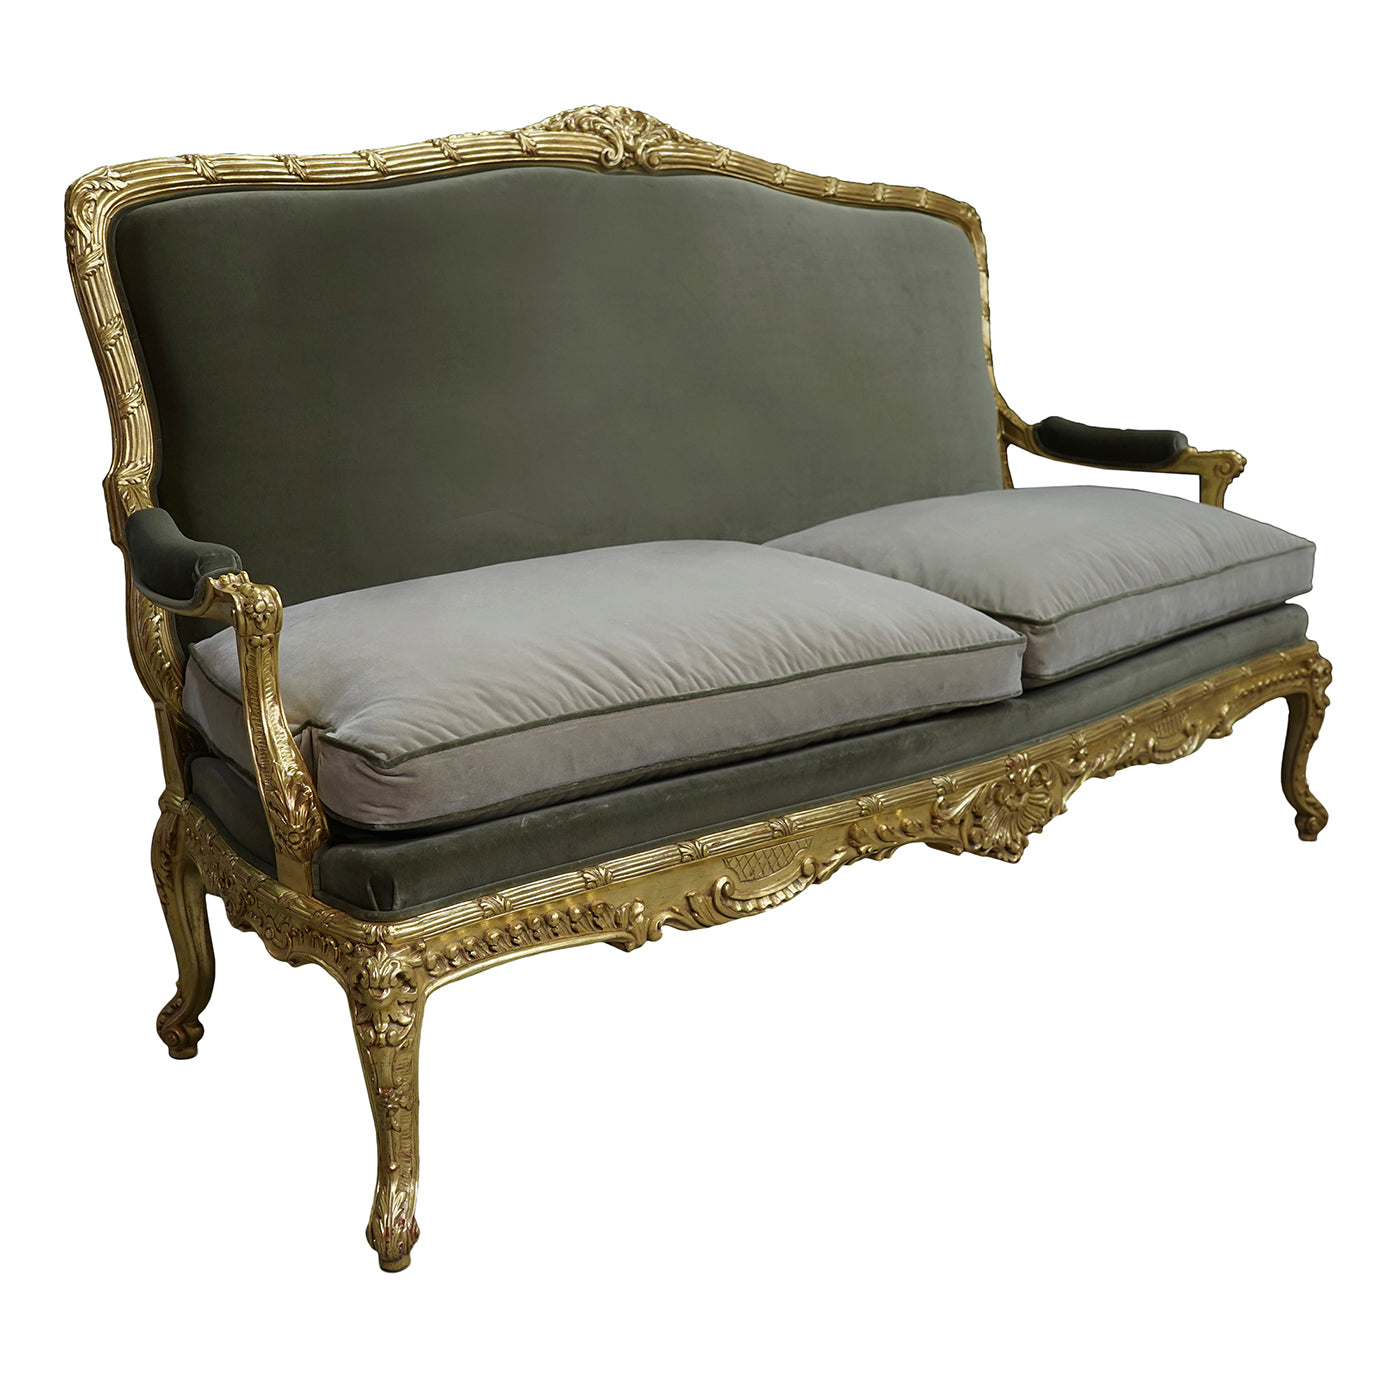 FRENCH TRANSITIONAL STYLE SOFA - Main view